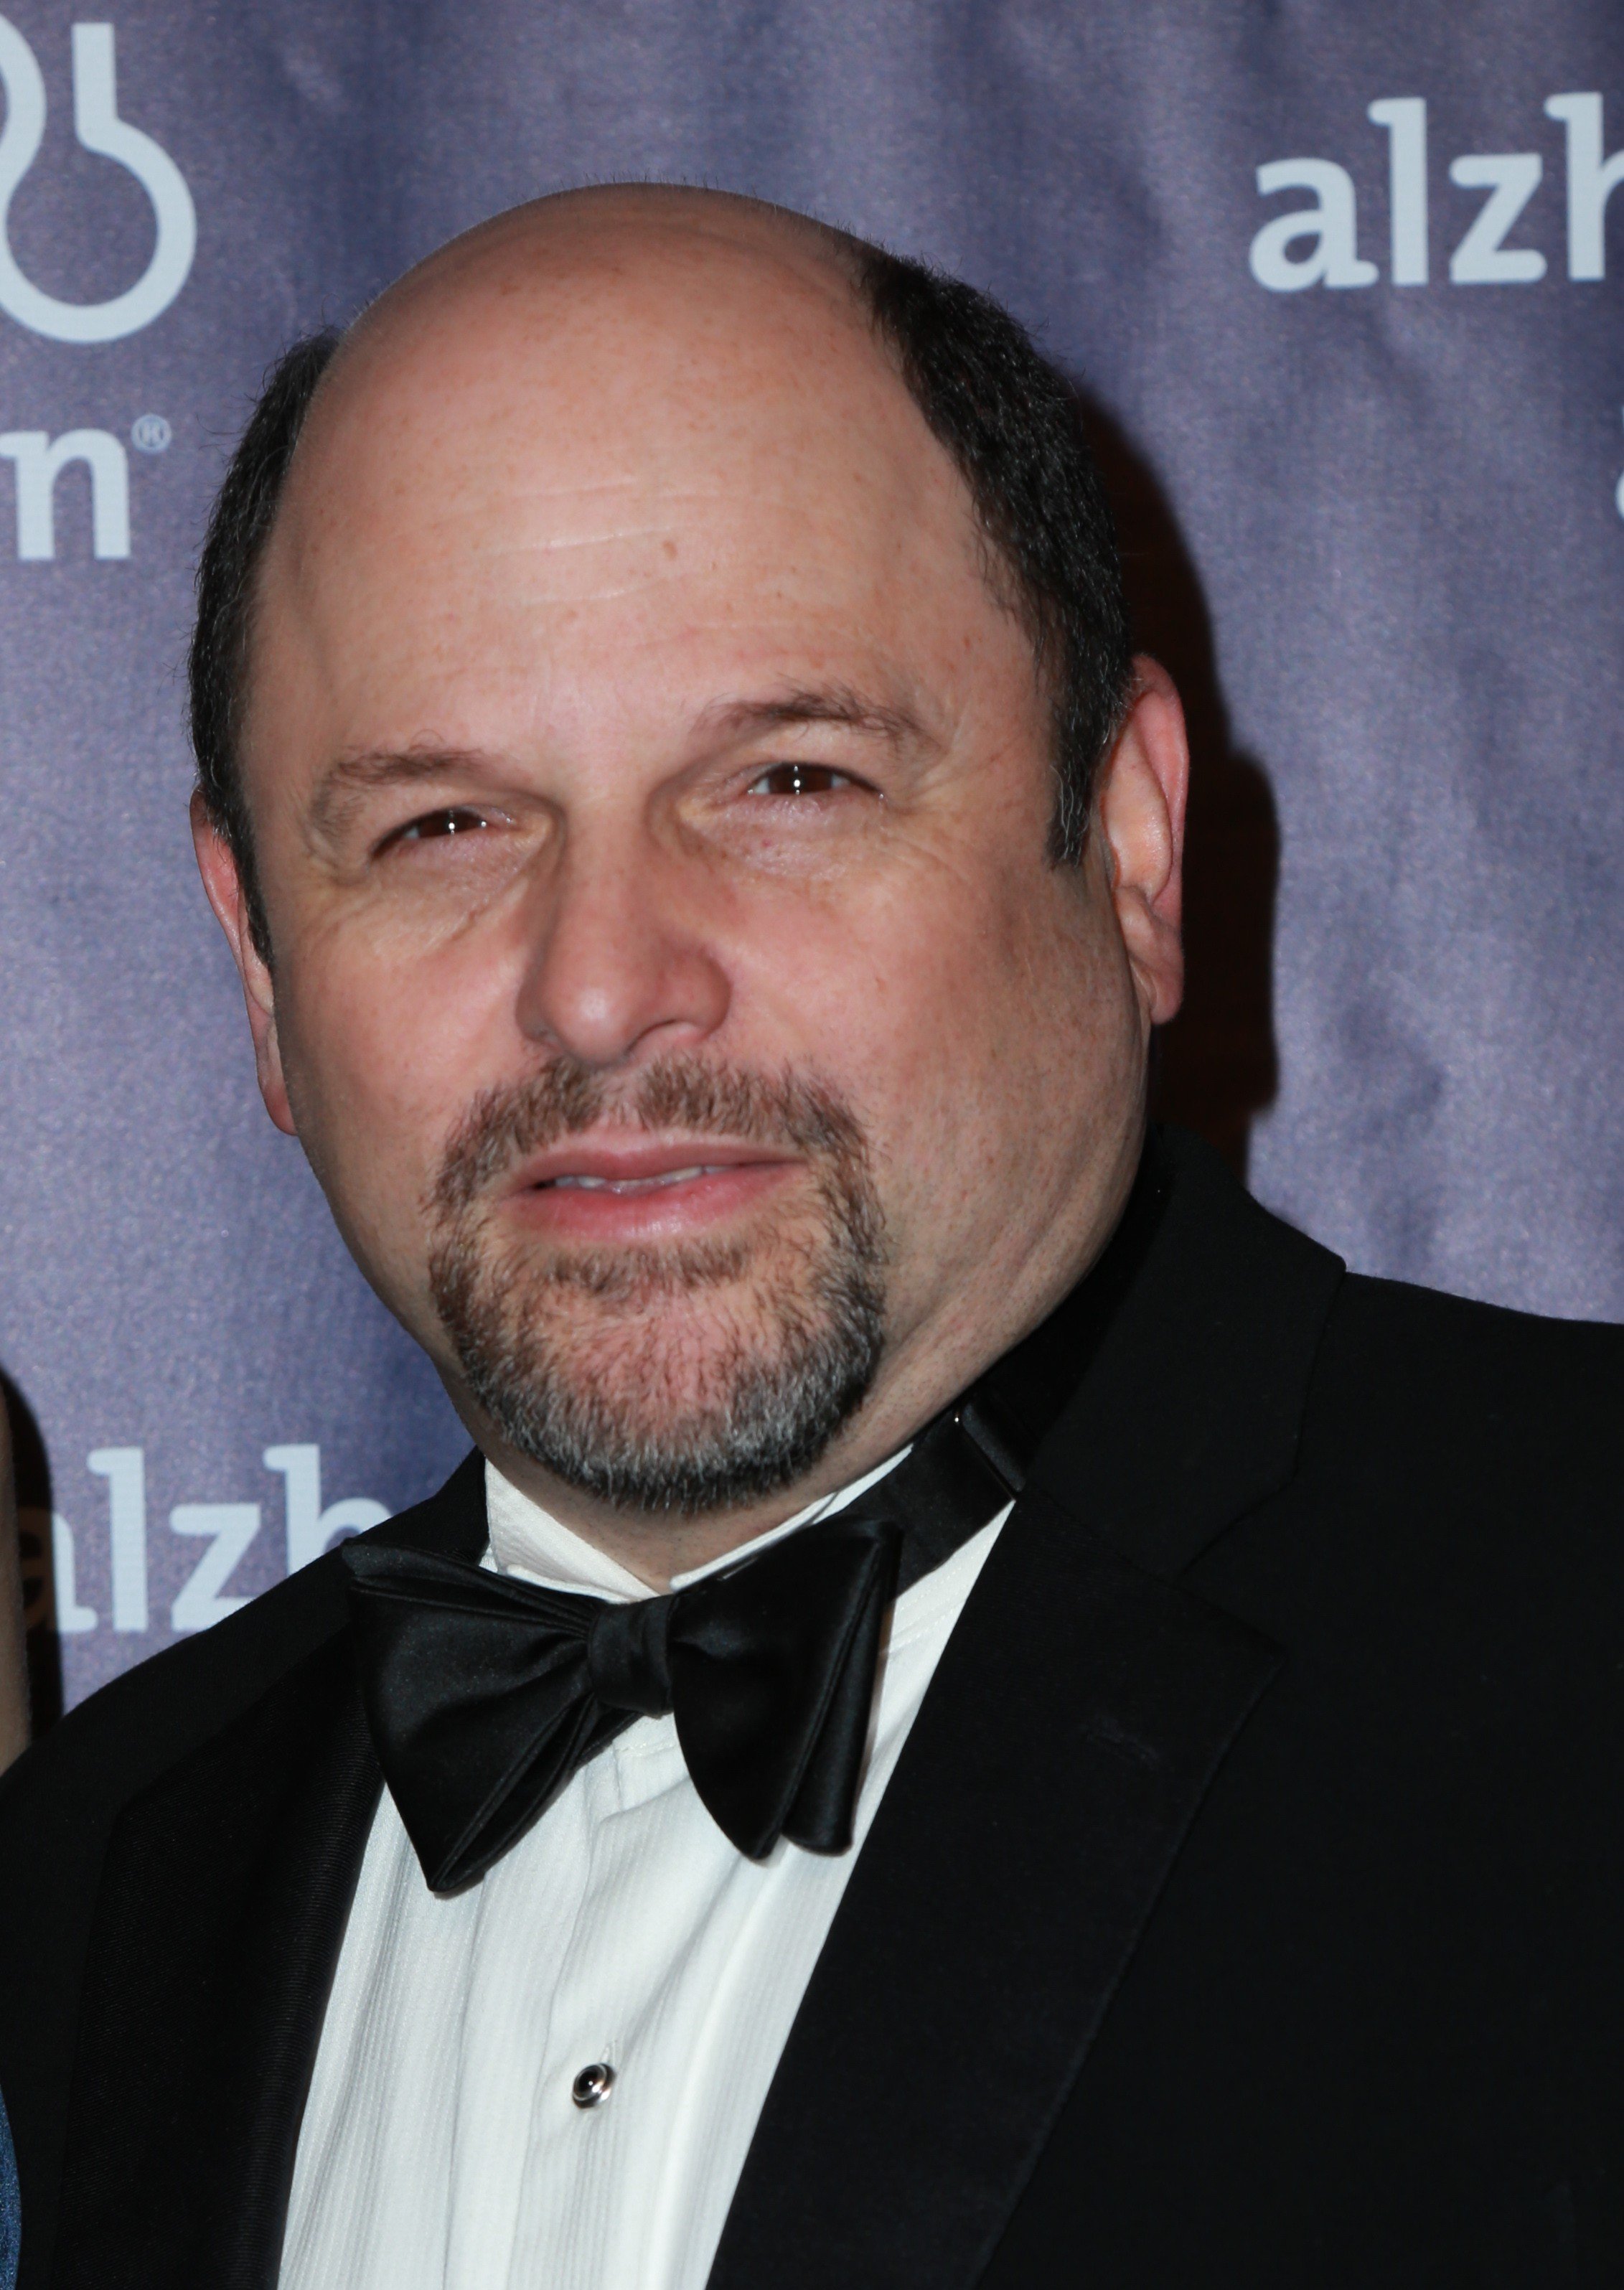 Jason Alexander attends the 23rd Annual 'A Night At Sardi's' To Benefit The Alzheimer's Association at The Beverly Hilton Hotel on March 18, 2015 in Beverly Hills. (P. Michele—Retna Ltd./Getty Images)